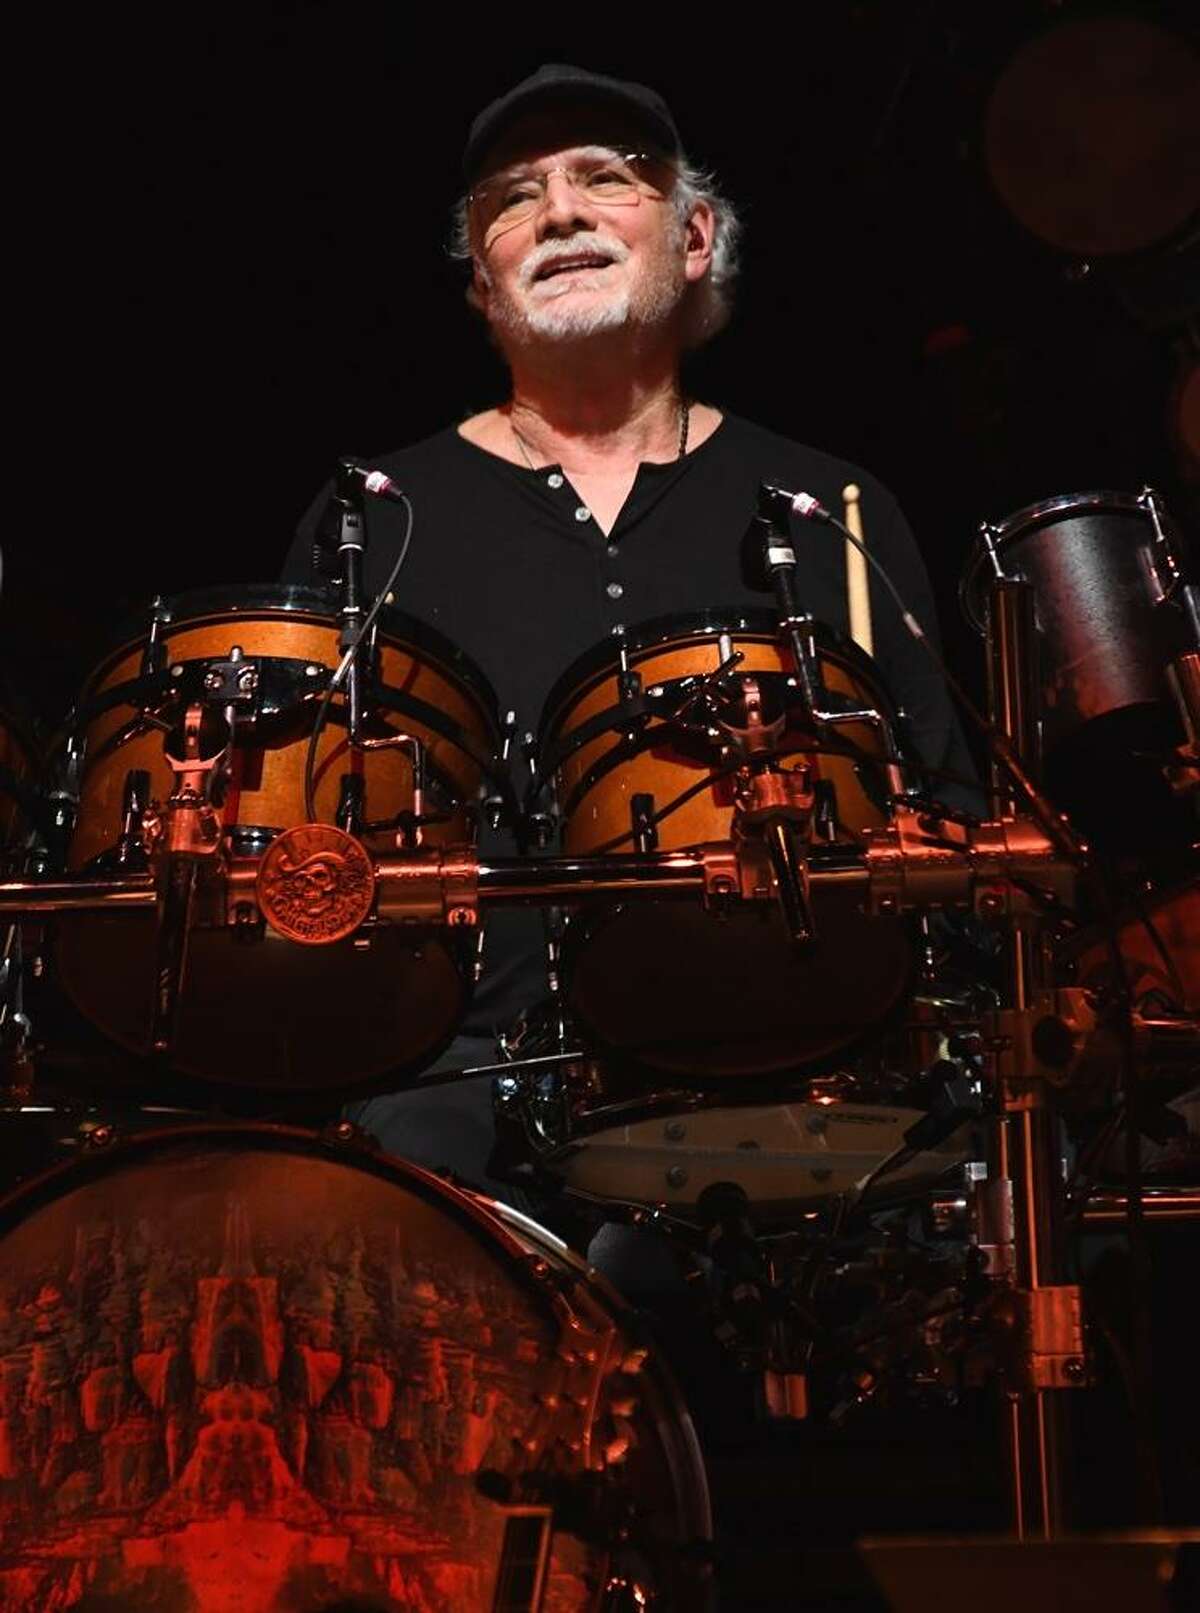 Drummer Bill Kreutzman, of The Grateful Dead, is shown performing on stage during a ?“live?” concert appearance with Dead and Company at the XL Center in Hartford on Nov. 22. The band which also included musicians Bob Weir, John Mayer, Oteil Burbridge and Jeff Chimenti packed the Hartford venue and entertained all in attendance. Kreutzmann, a founding member of the Grateful Dead in 1964, remained with the band until its dissolution after the death of Jerry Garcia in 1995, making him one of four members to play at every one of the band?’s 2,300 shows, along with Garcia, Weir and Lesh. In 1994, Kreutzmann and the other members of the Grateful Dead were inducted into the ?“Rock and Roll Hall of Fame?”. In 2007, they won a ?“Grammy Lifetime Achievement Award?”. To learn more you can visit www.billkruetzmann.com